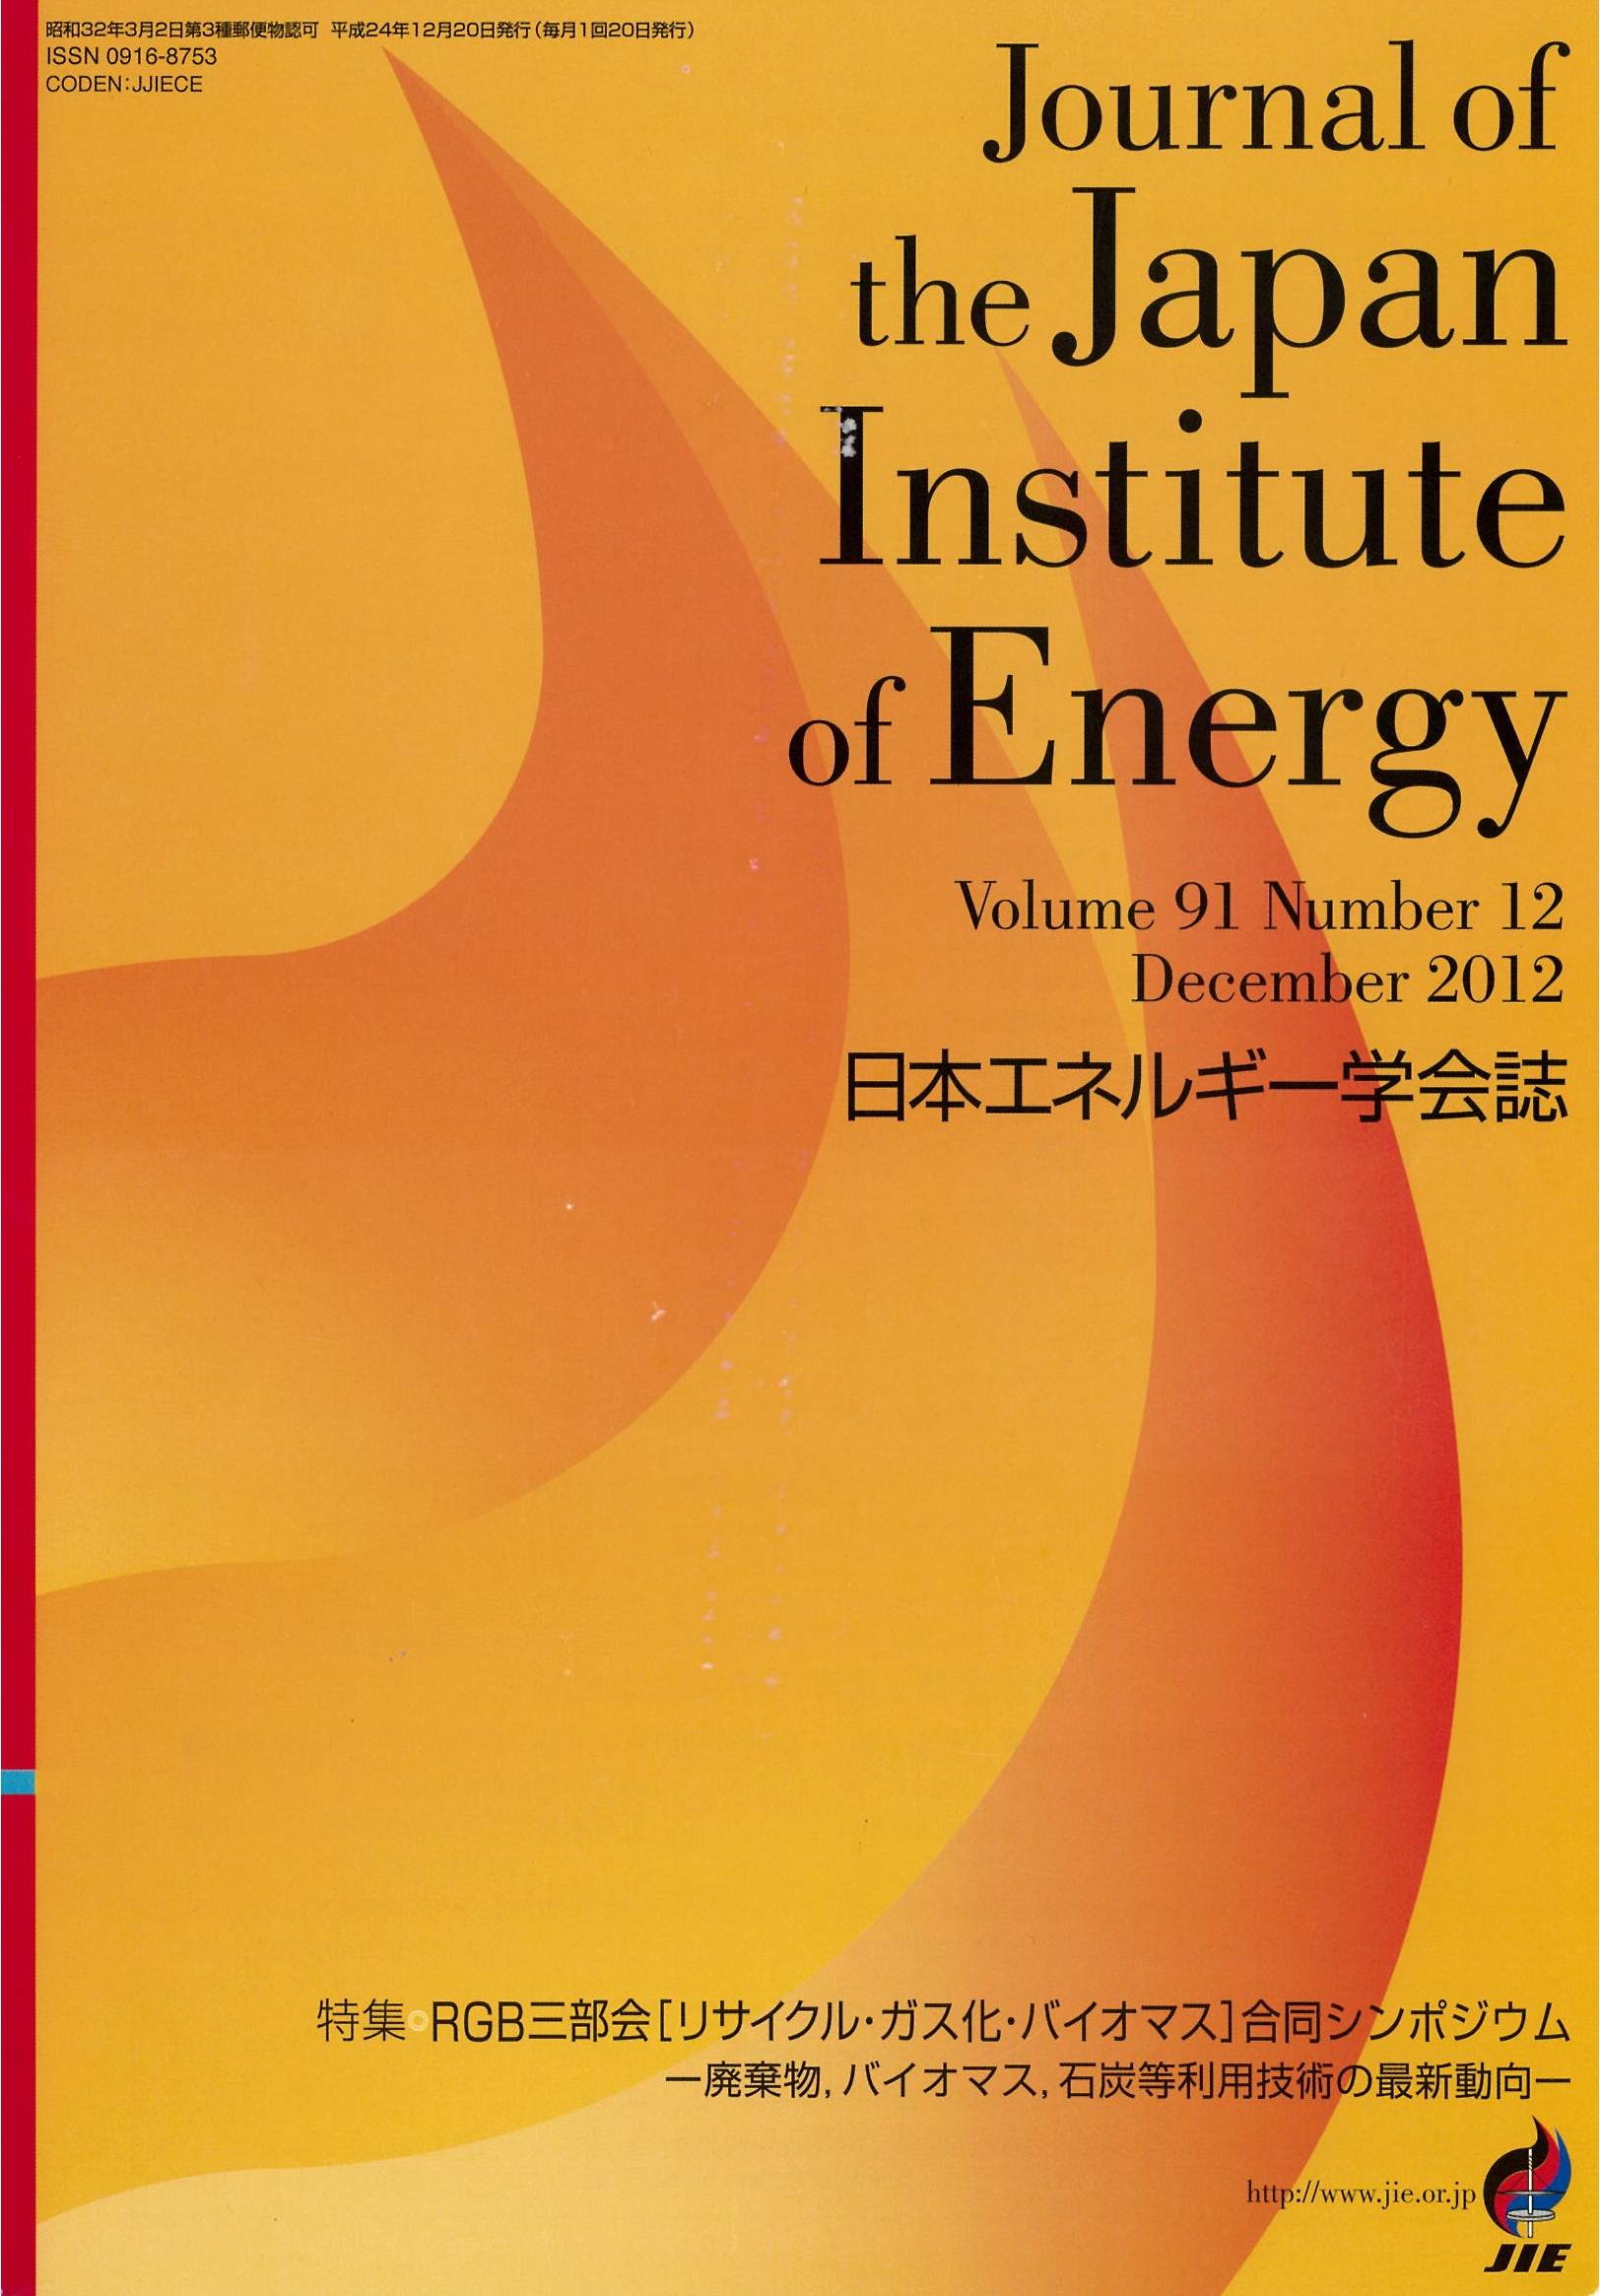 Journal of the Japan Institute of Energy Vol.91 No.12 (2012年12月號)